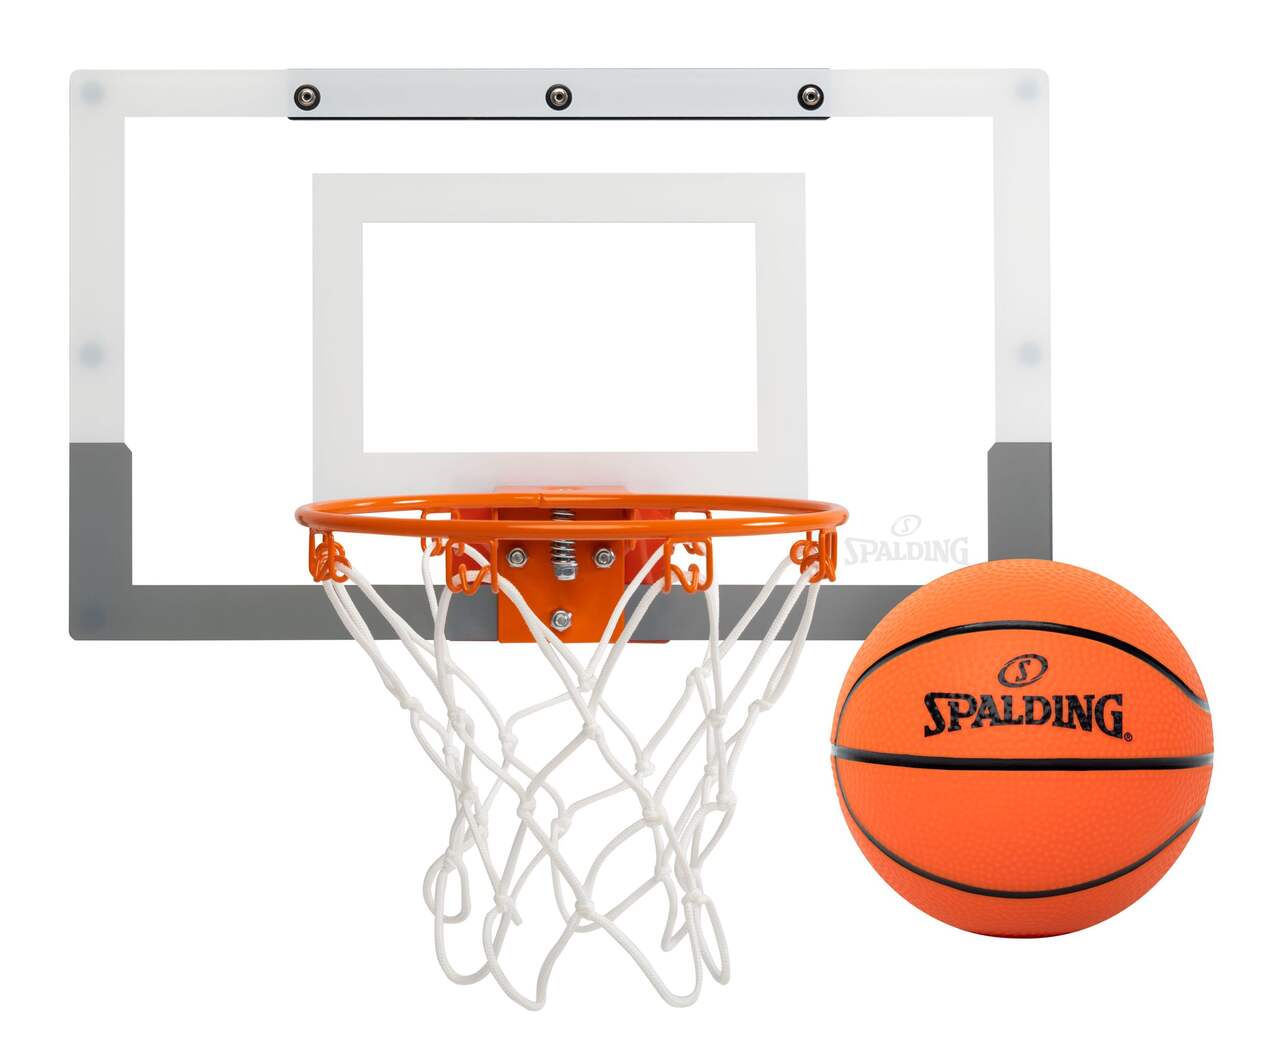 https://media-www.canadiantire.ca/product/playing/team-sports-and-golf/court-sports/0842422/spalding-slam-jam-e17d135e-03d9-4450-891a-a11c950255fa-jpgrendition.jpg?imdensity=1&imwidth=640&impolicy=mZoom